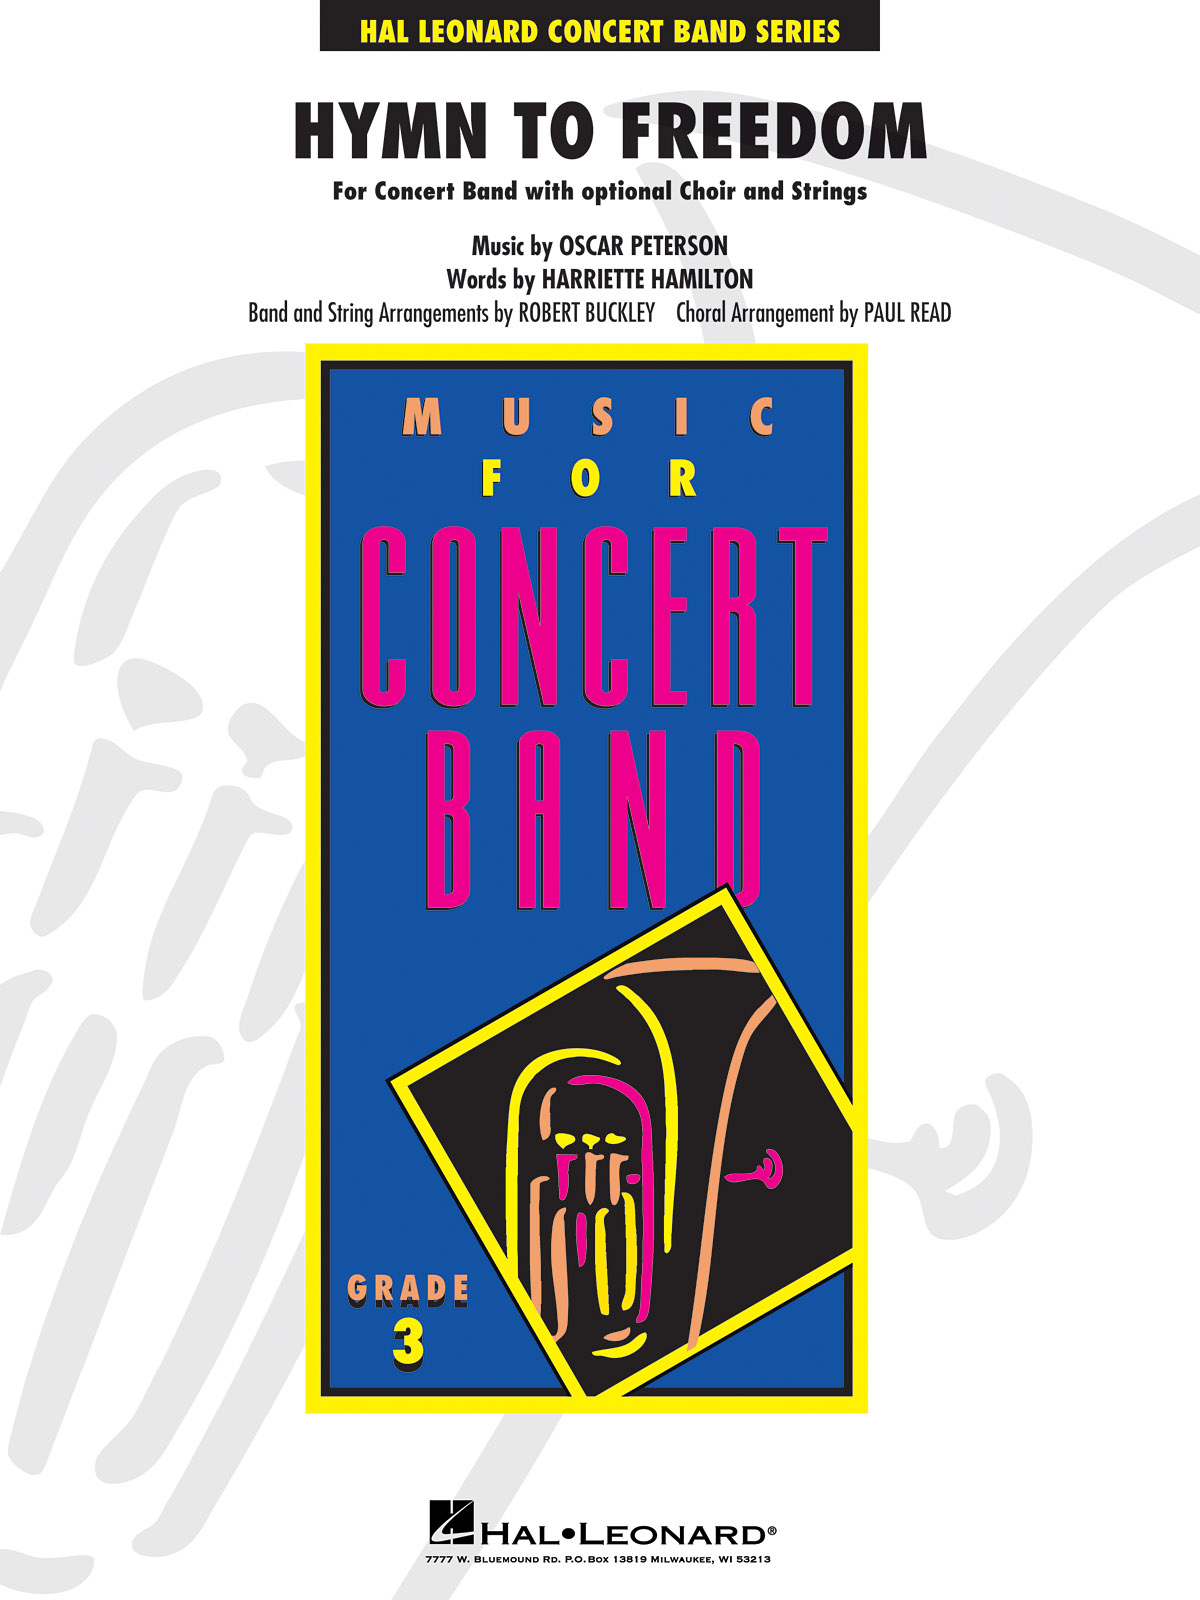 Oscar Peterson: Hymn to Freedom: Concert Band: Score & Parts